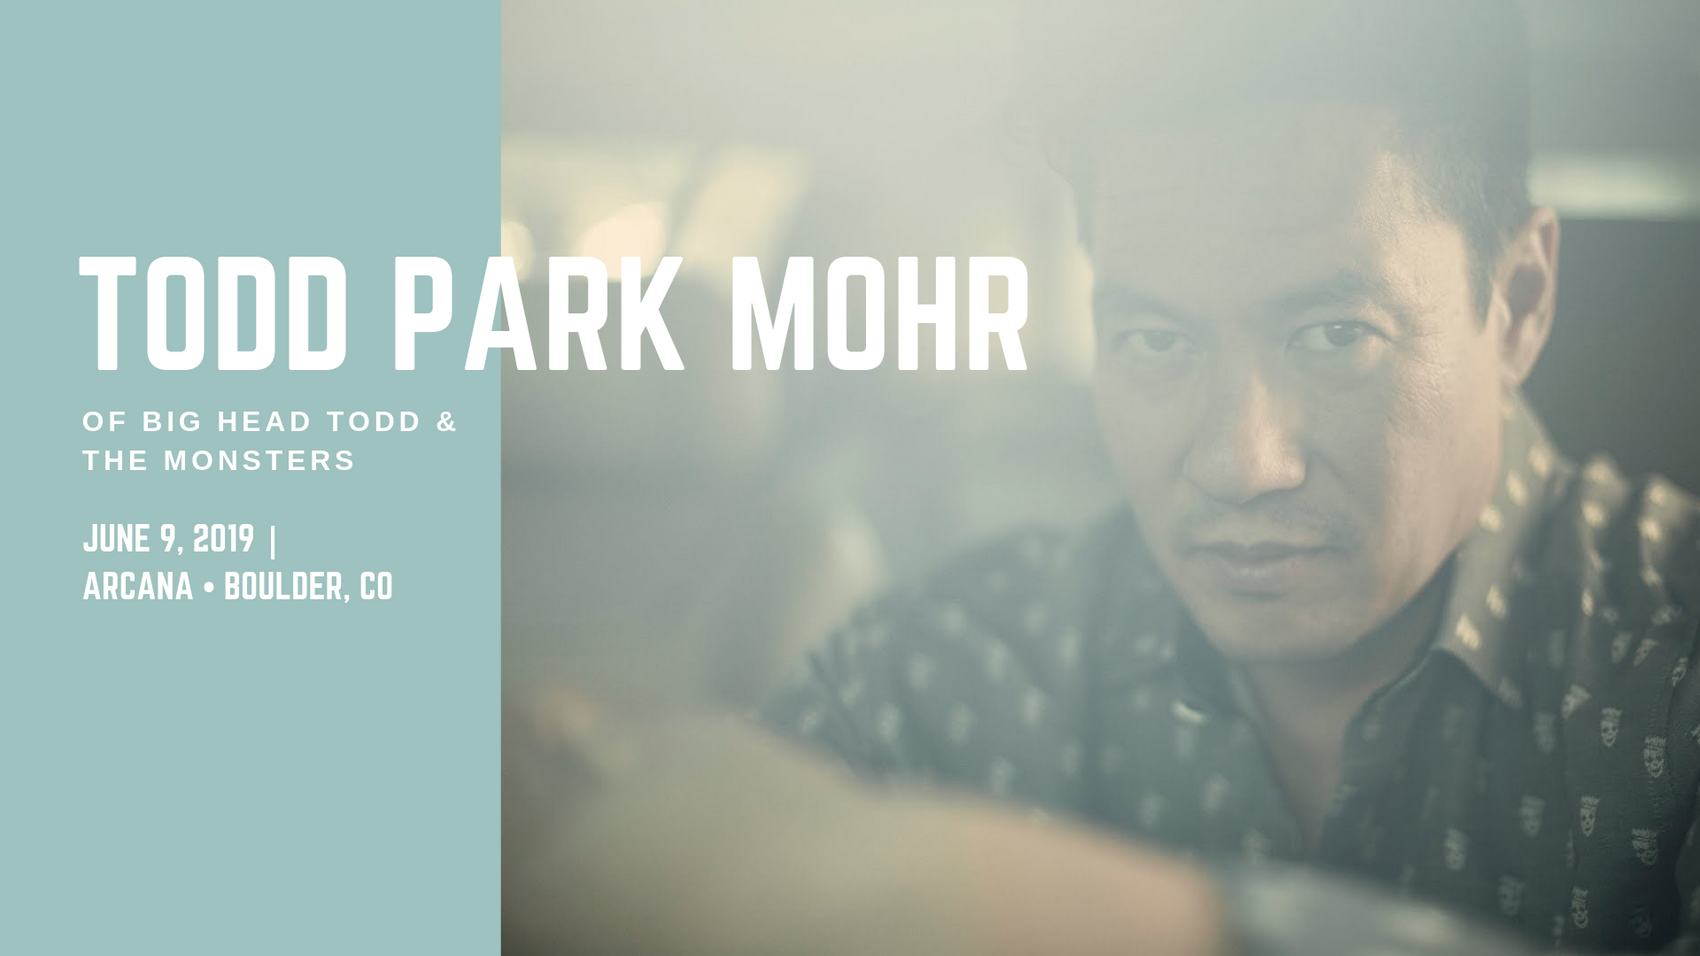 An Evening with Todd Park Mohr